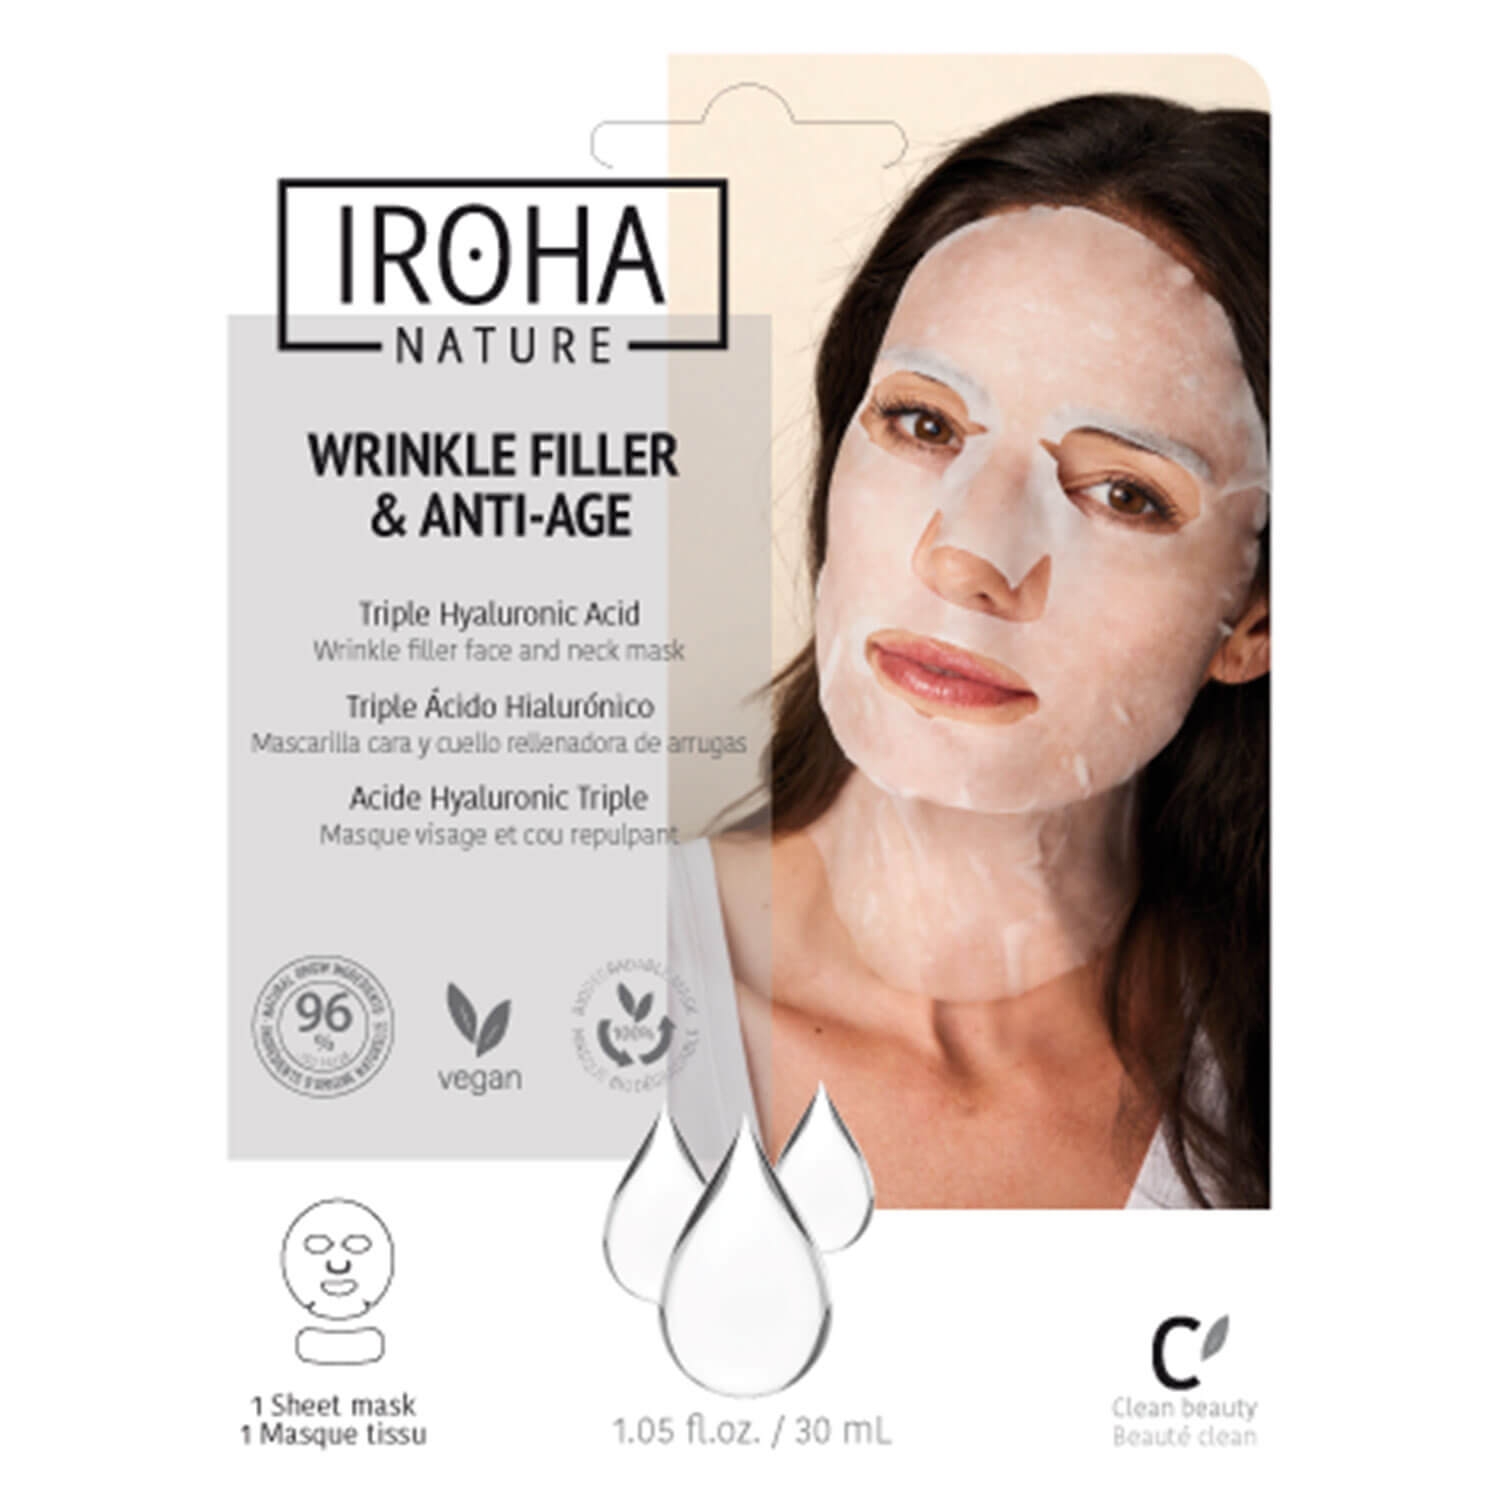 Product image from Iroha Nature - Wrinkle Filler & Anti-Age Triple Hyaluronic Acid Face & Neck Mask